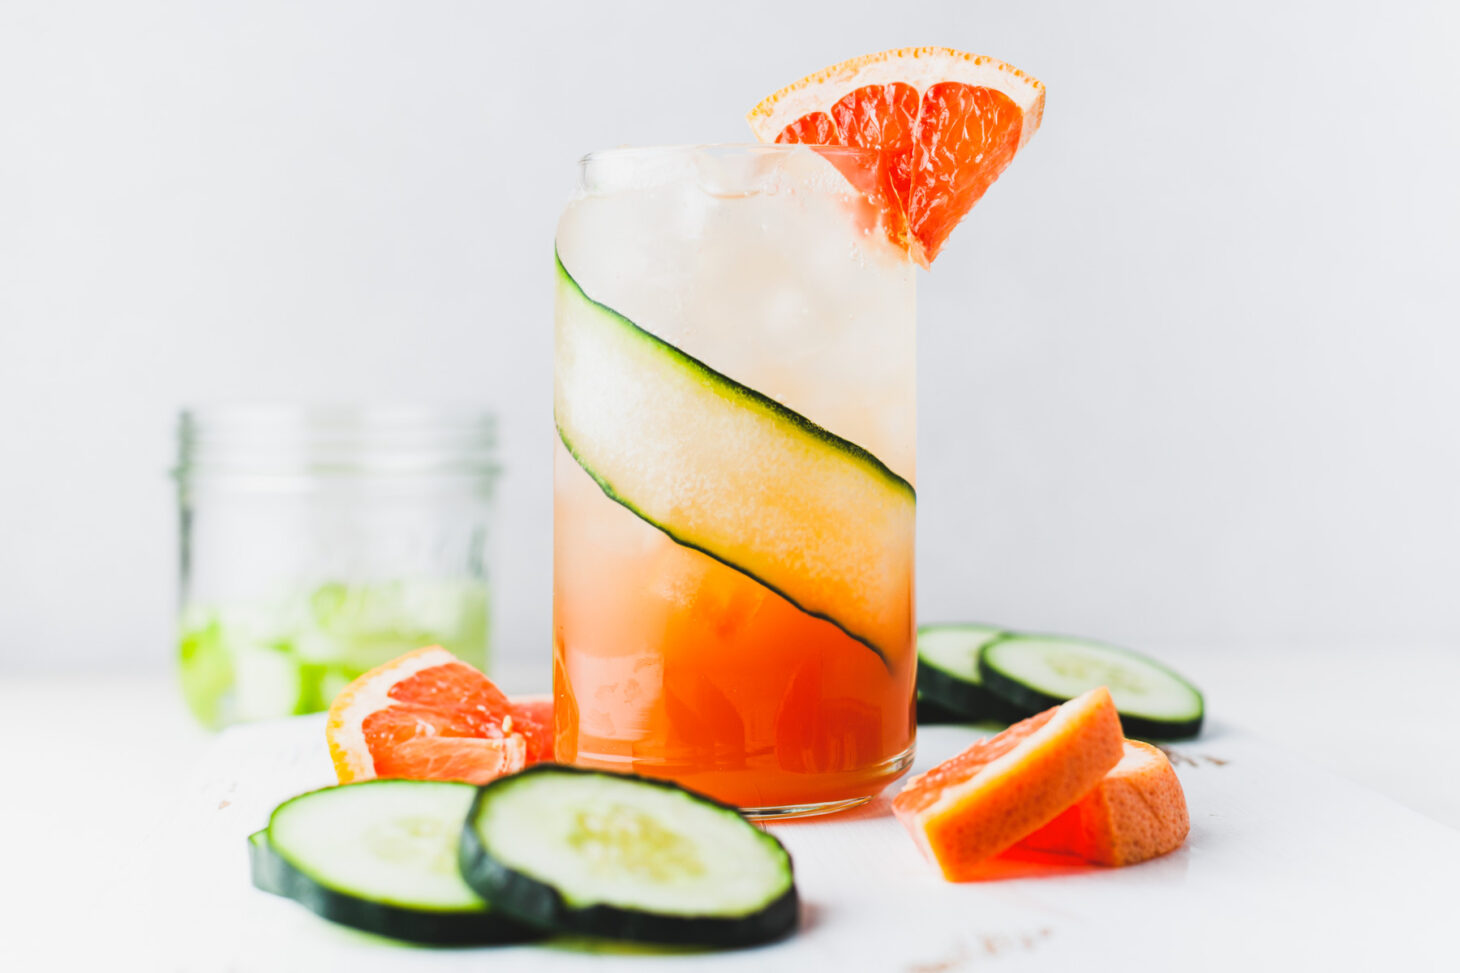 A cocktail glass lined with a thin slice of cucumber and filled with ice and pink grapefruit cocktail with a small wedge of grapefruit as a garnish.